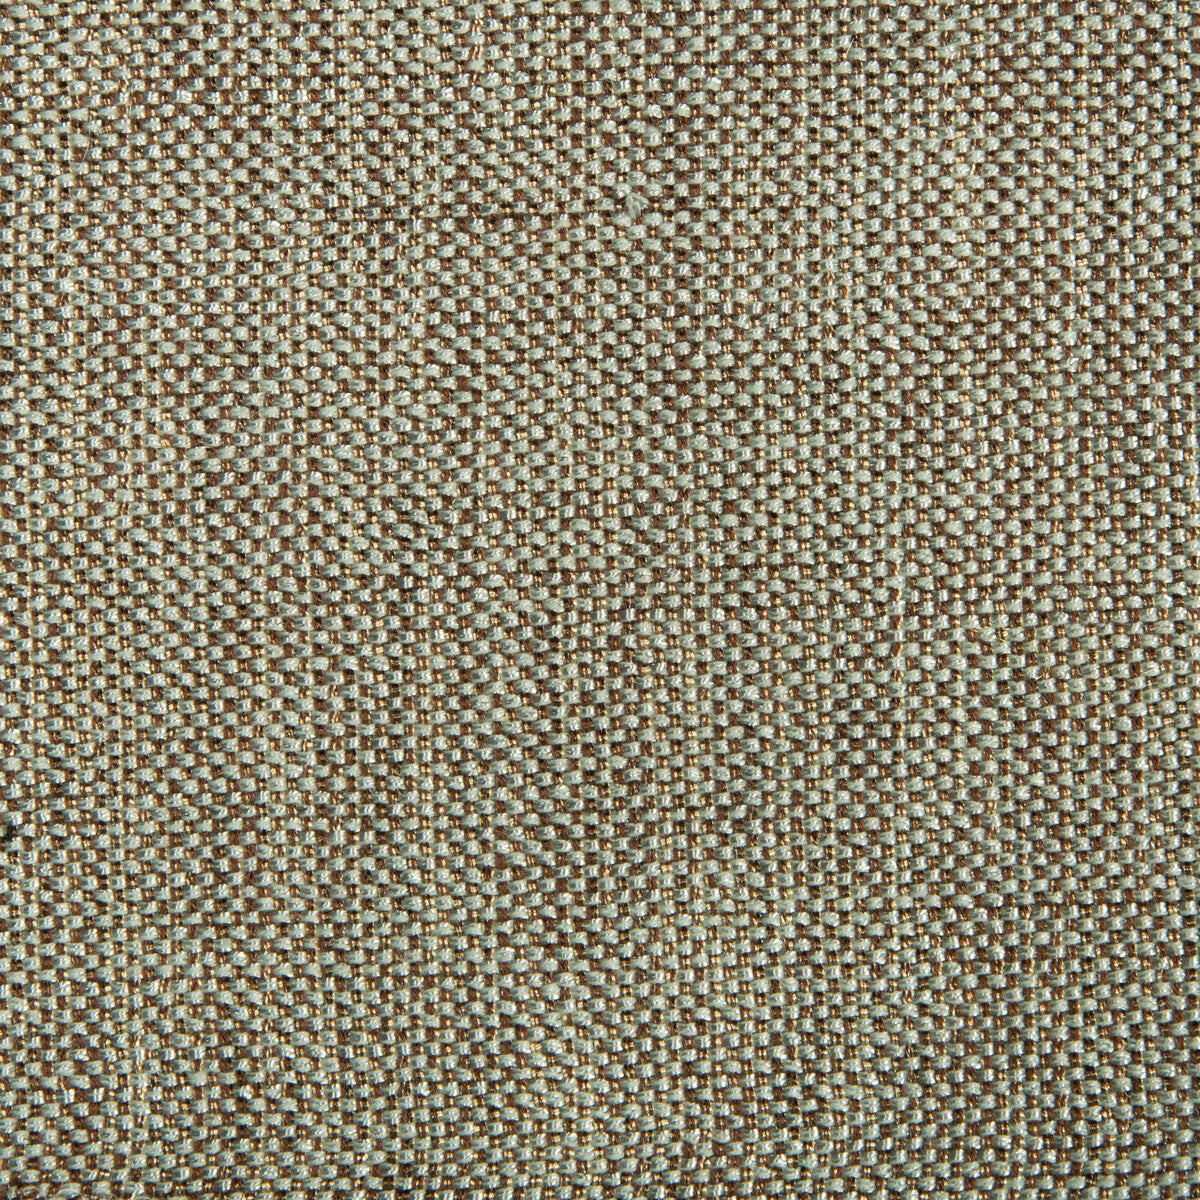 Kravet Contract fabric in 34926-615 color - pattern 34926.615.0 - by Kravet Contract